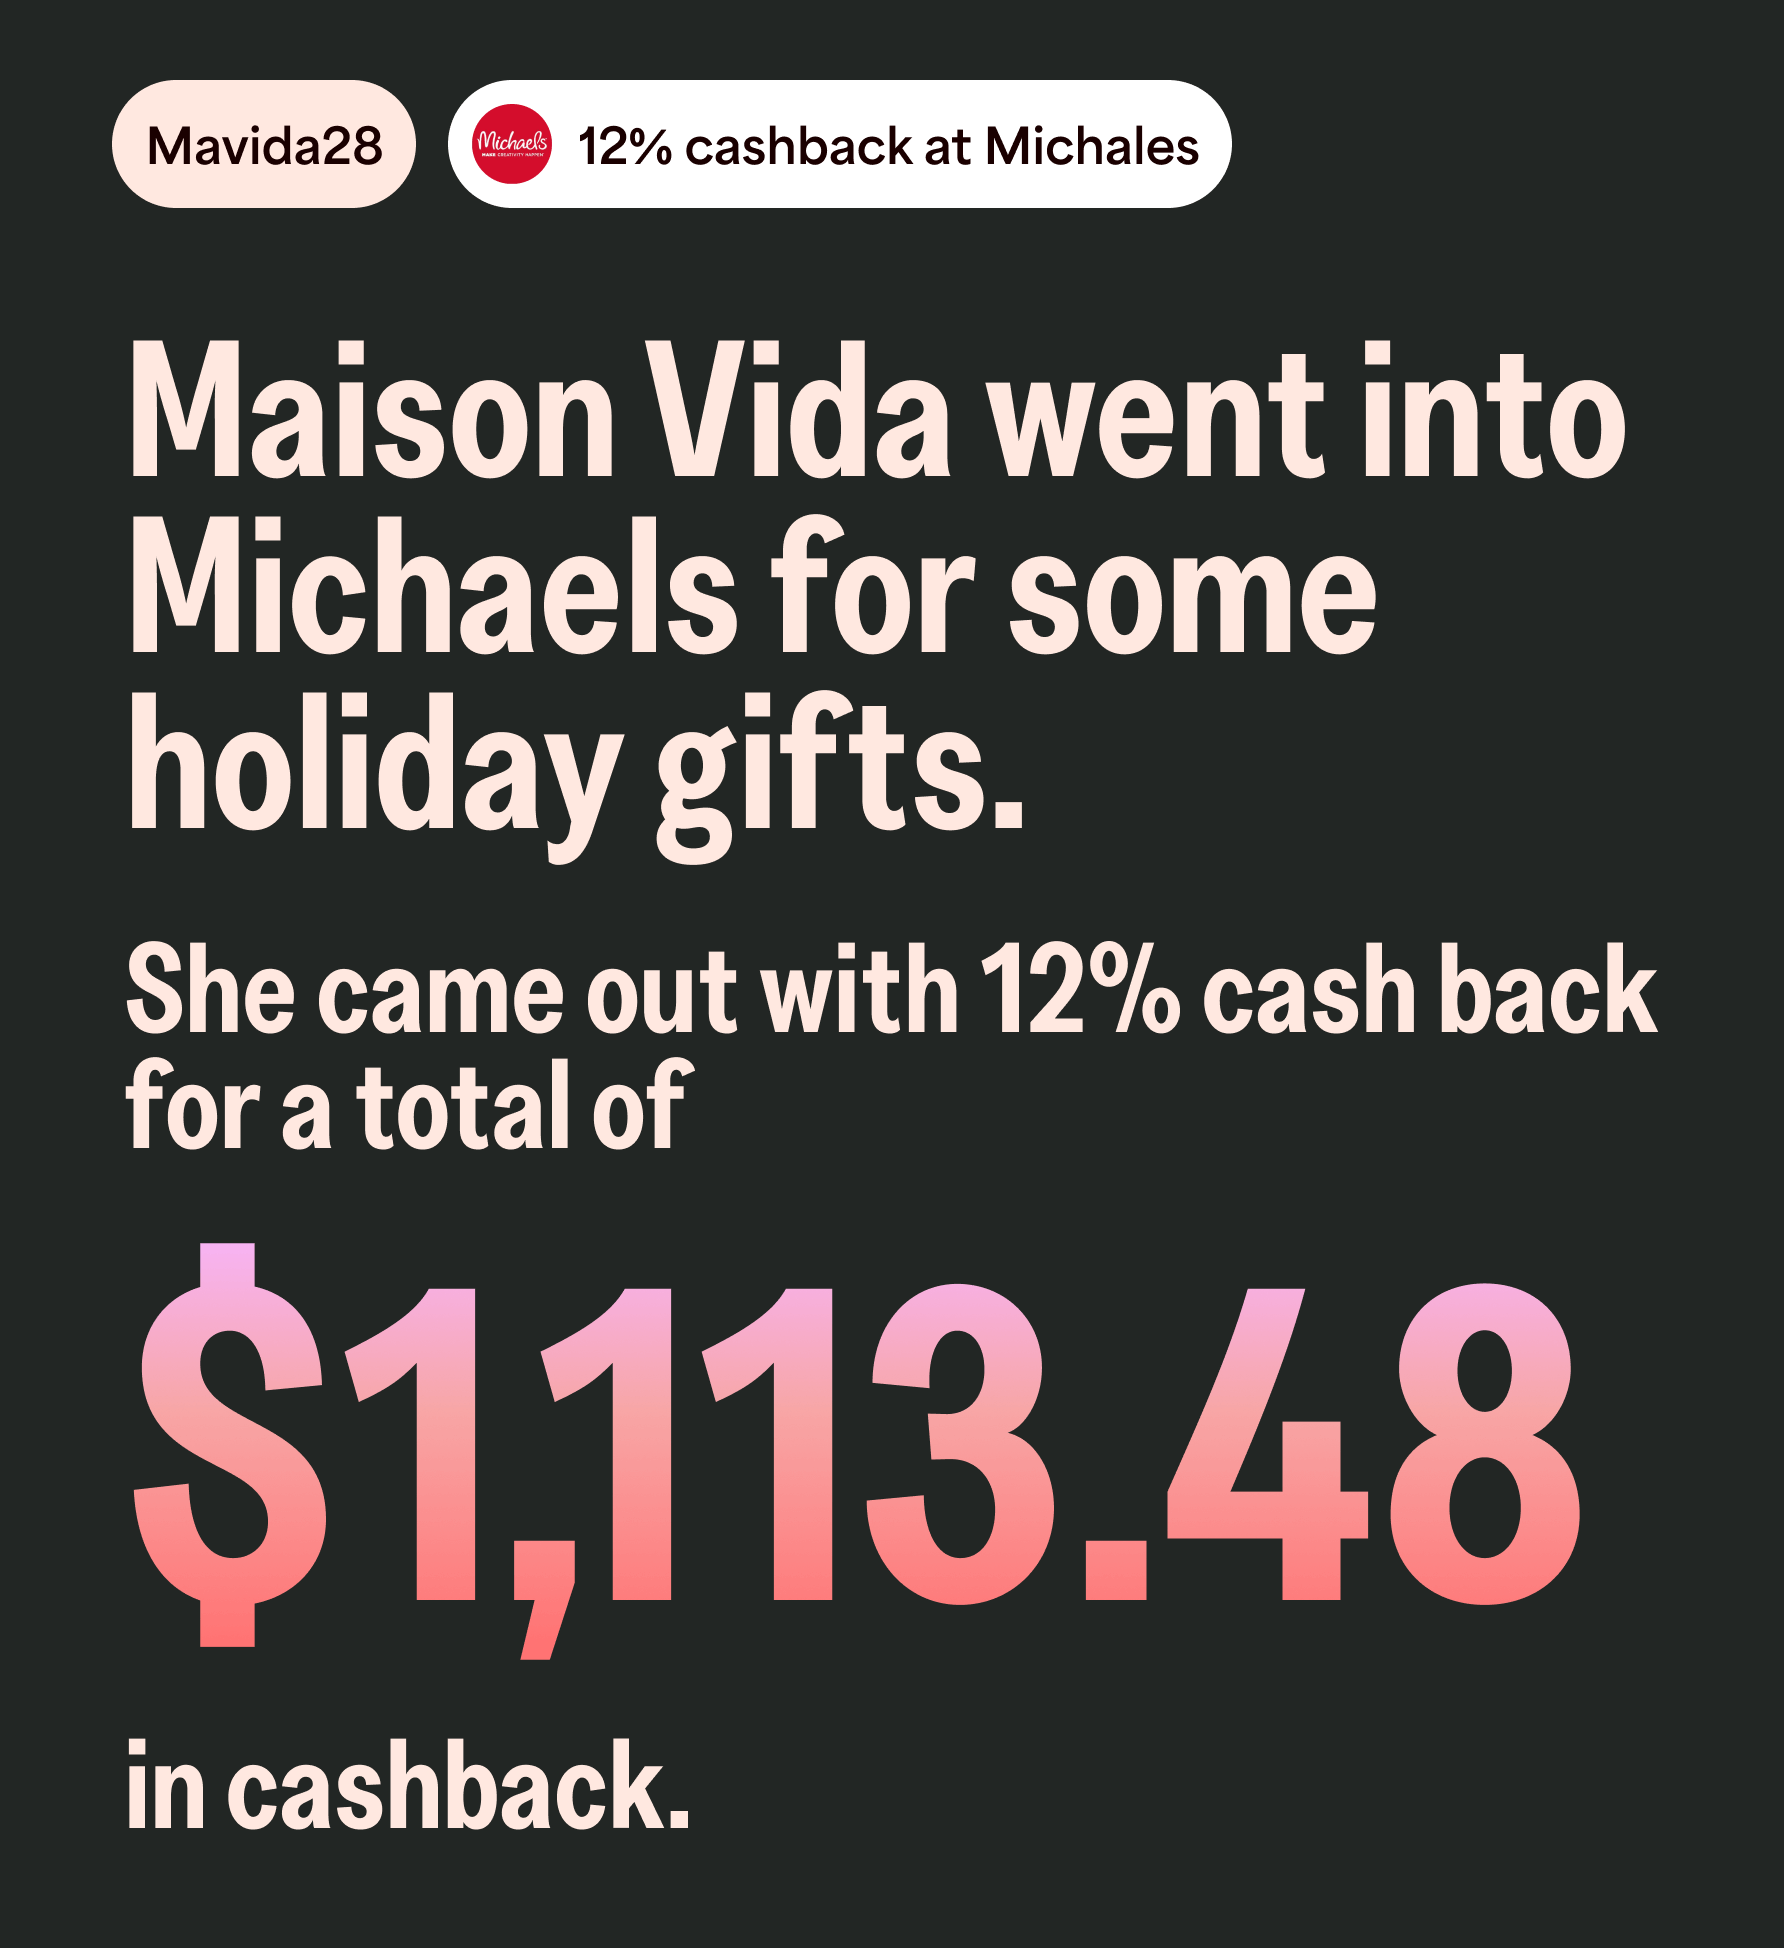 Mavida28 12% cashback at Michales. Maison Vida went into Michaels for some holiday gifts. She came out with 12% cash back for a total of $1,113.48 in cashback.